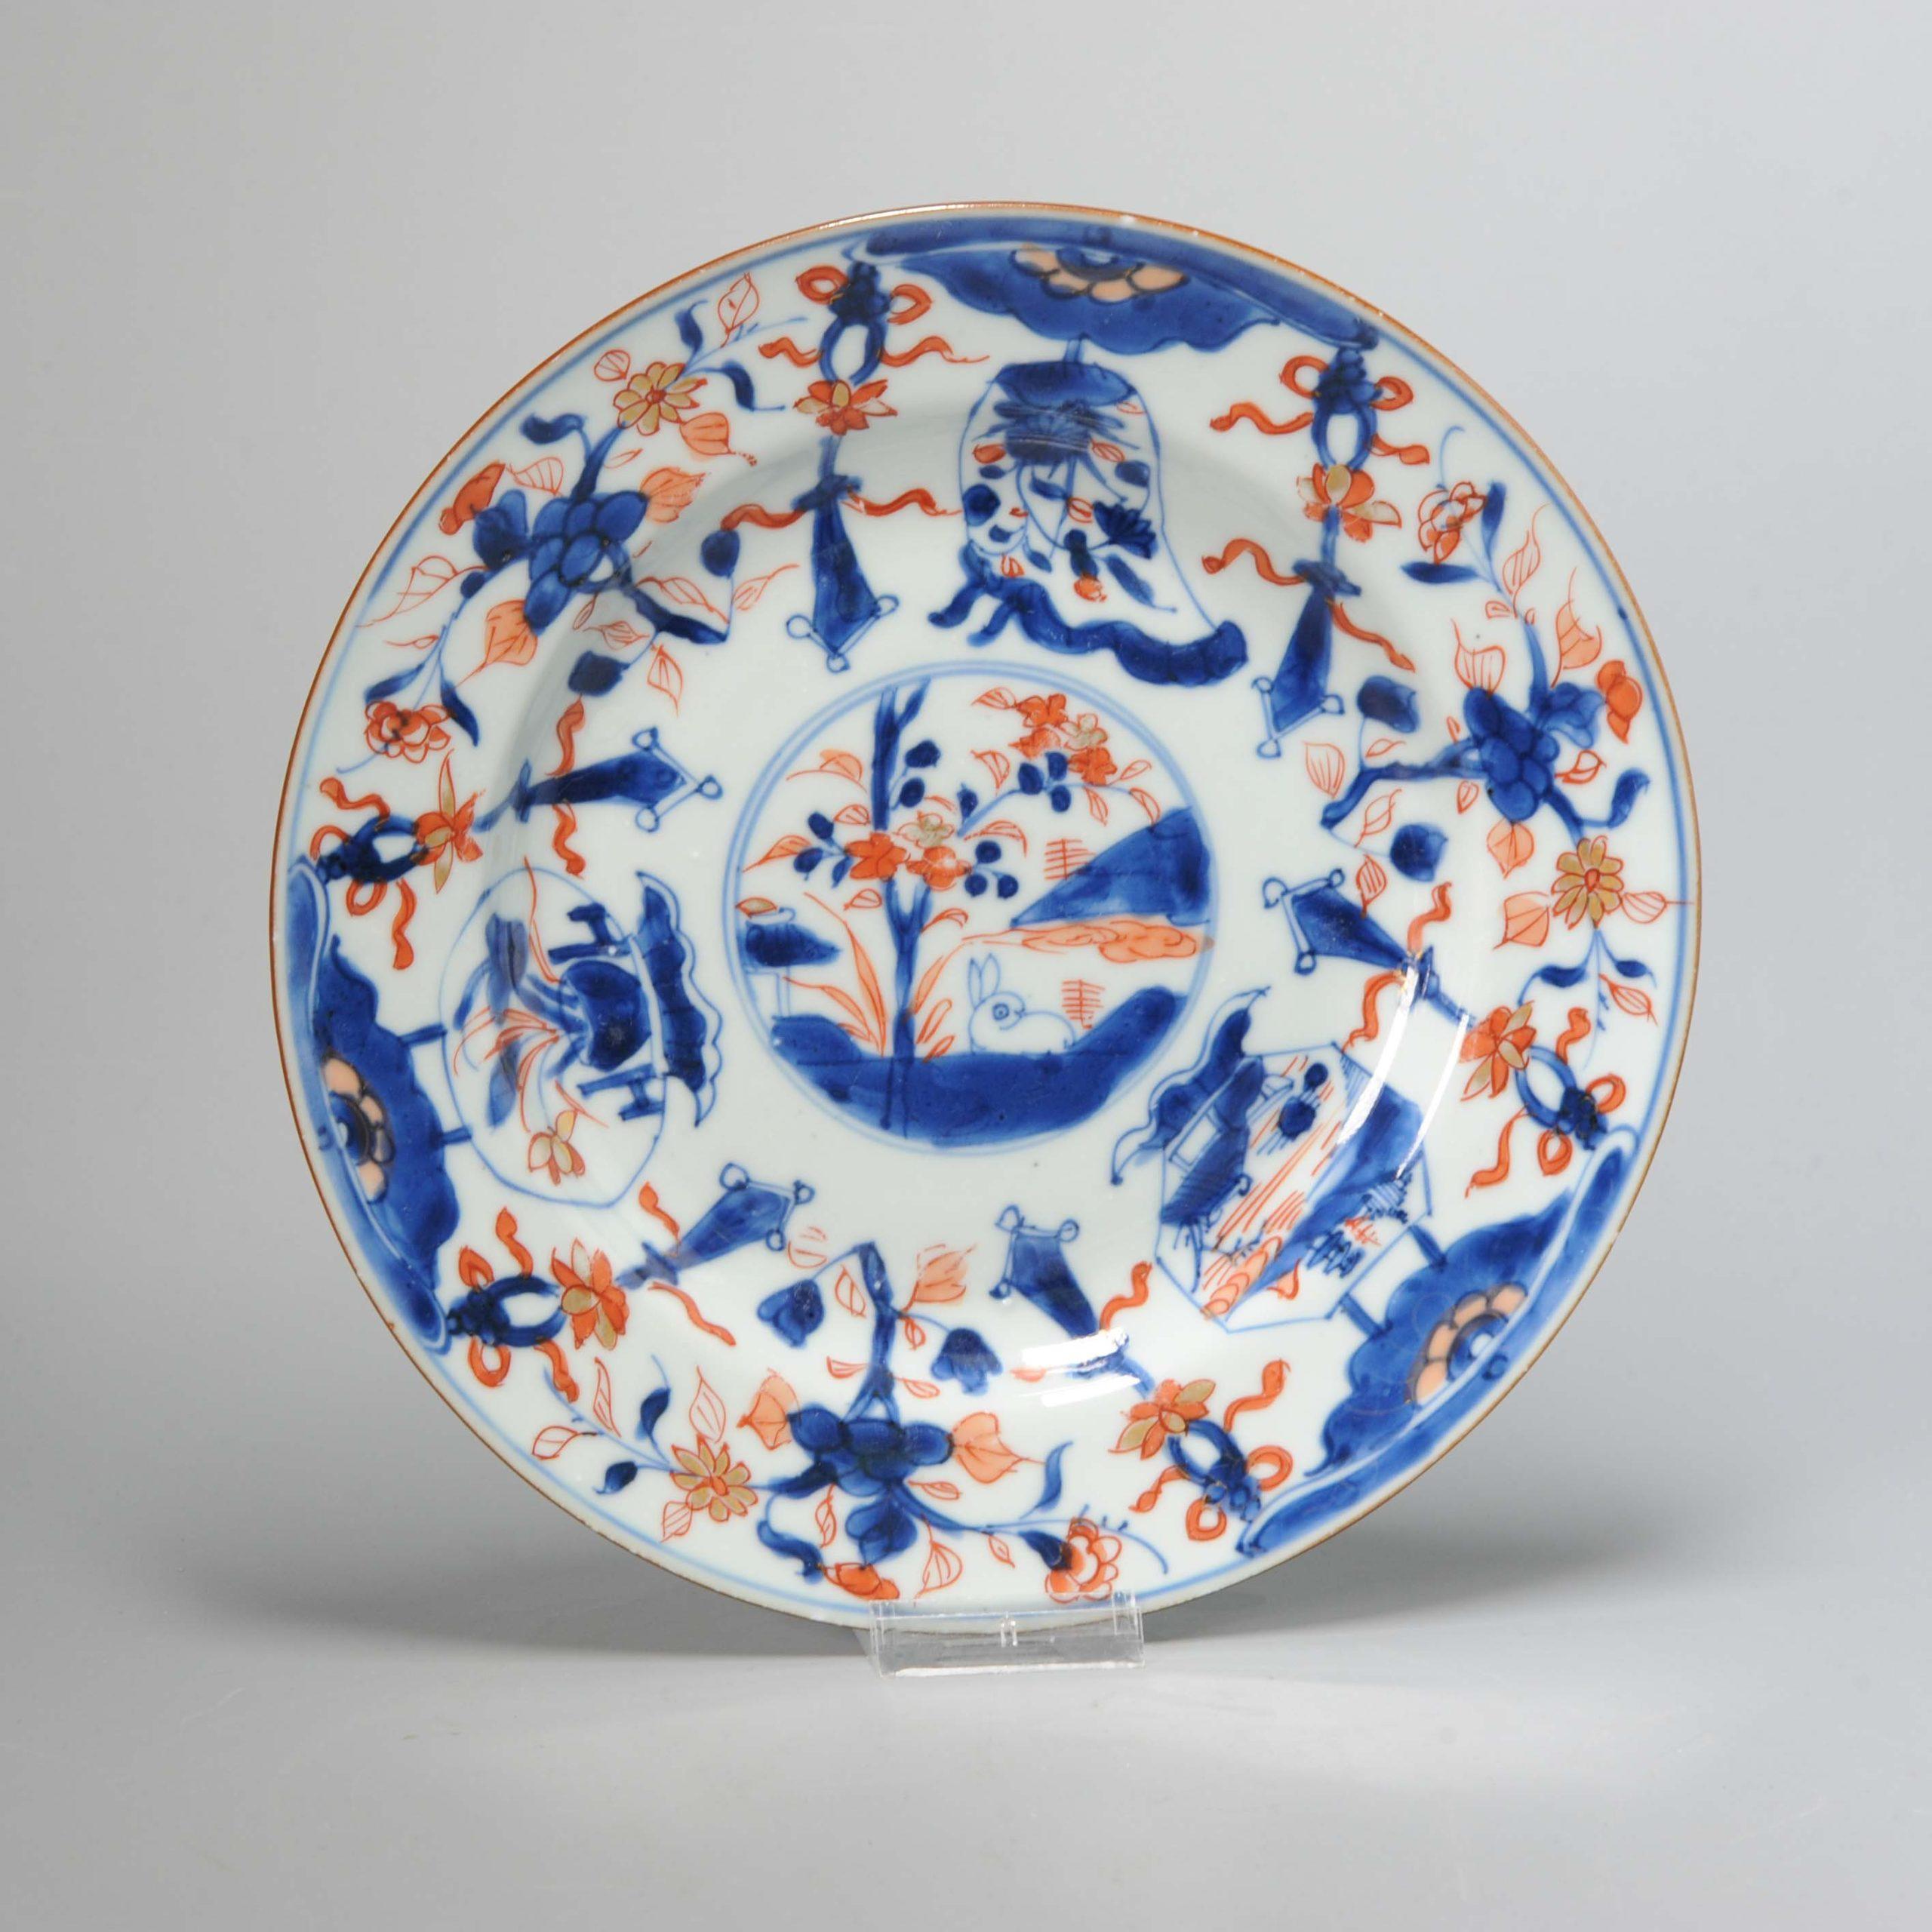 A wonderfull and high quality painted imari dish with unusual richly decorated scene of various objects, flowers and a hare in the centre.

Additional information:
Material: Porcelain & Pottery
Region of Origin: China
Period: 18th century Qing (1661